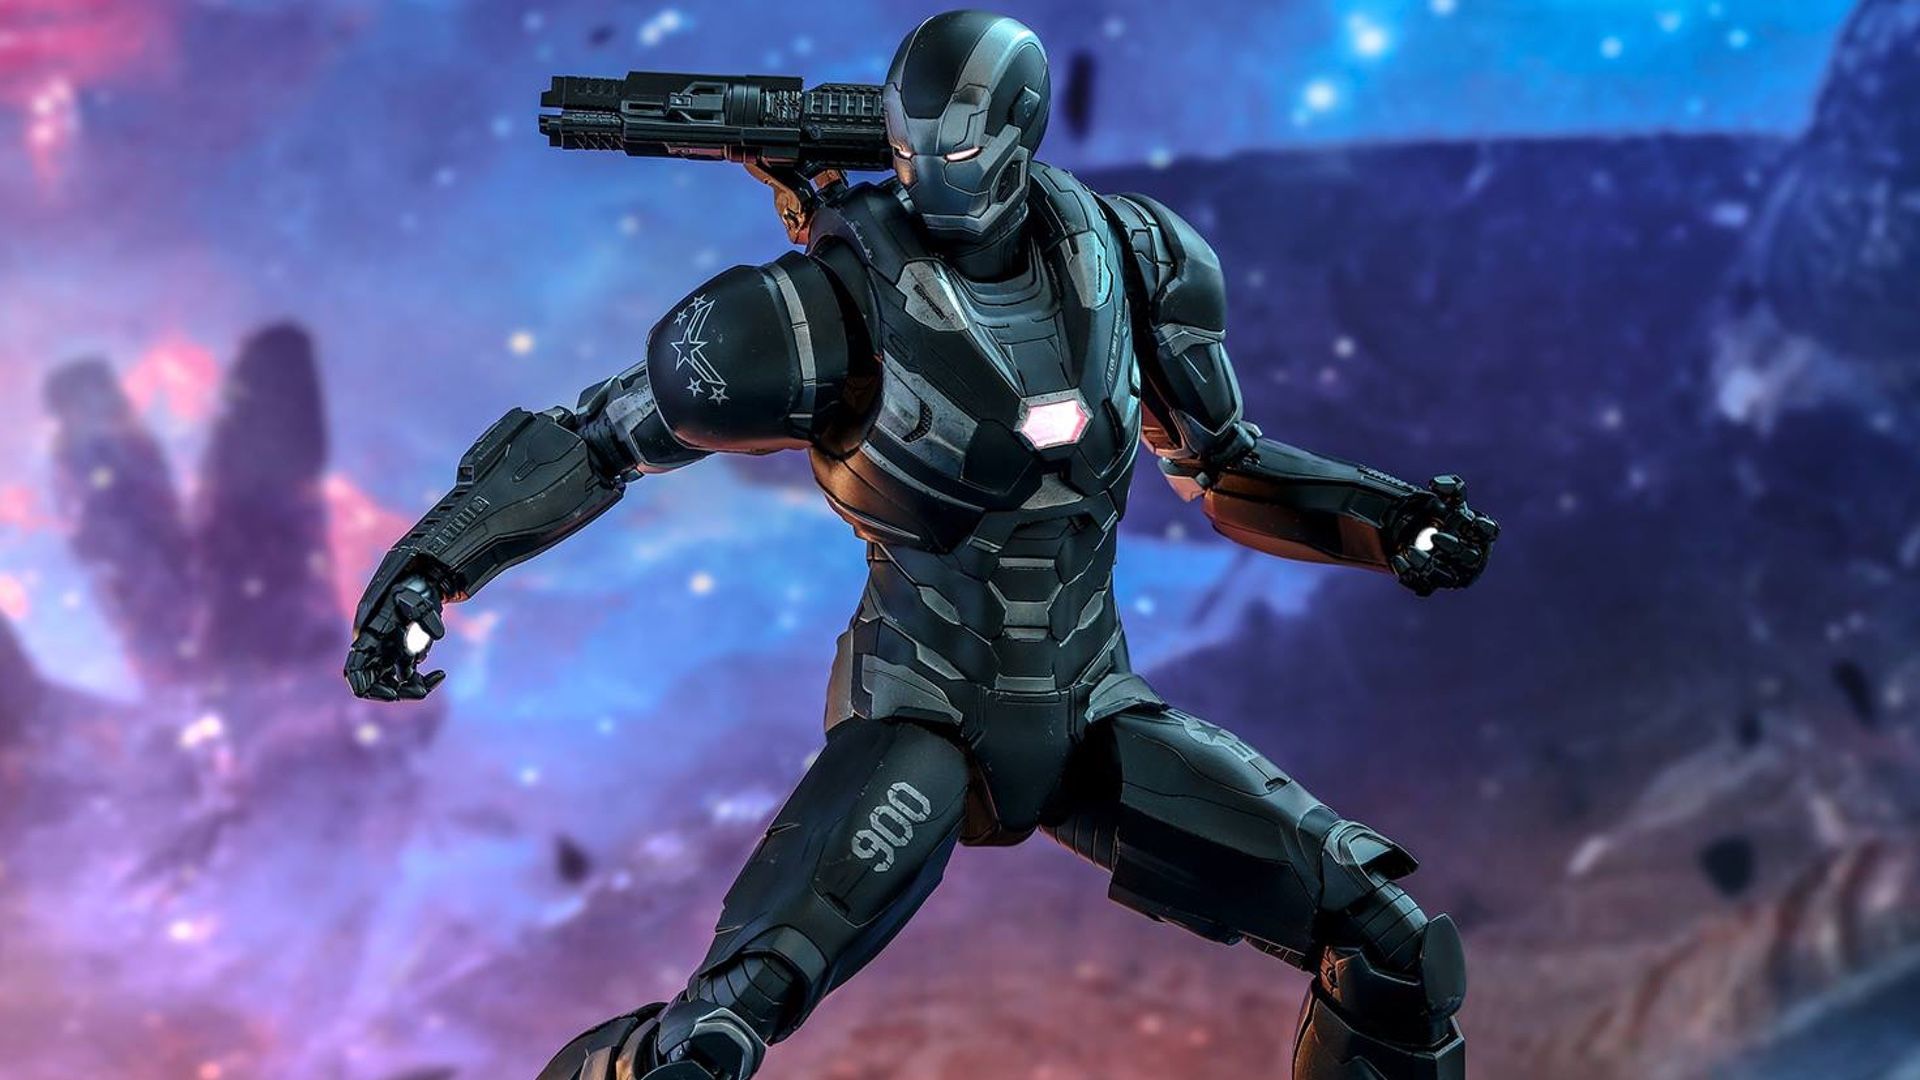 Hot Toys Reveals Their Radical War Machine Action Figure For AVENGERS: ENDGAME